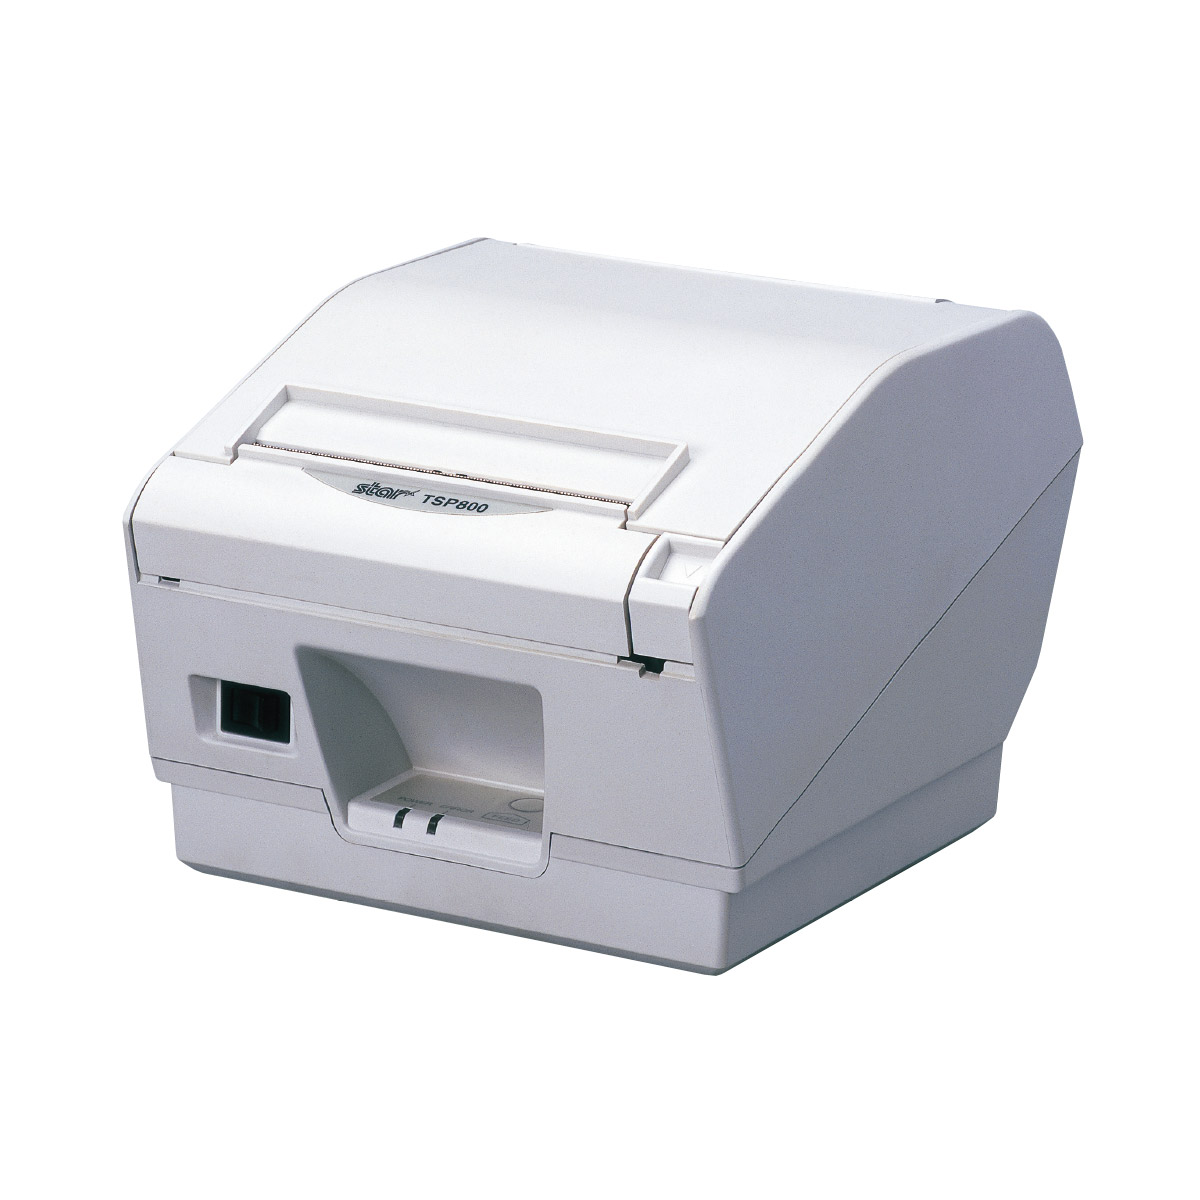 Paper Lock External Power Supply Included Star Micronics TSP800 Series Thermal printer Gray USB Auto-cutter/Tear Bar Renewed 